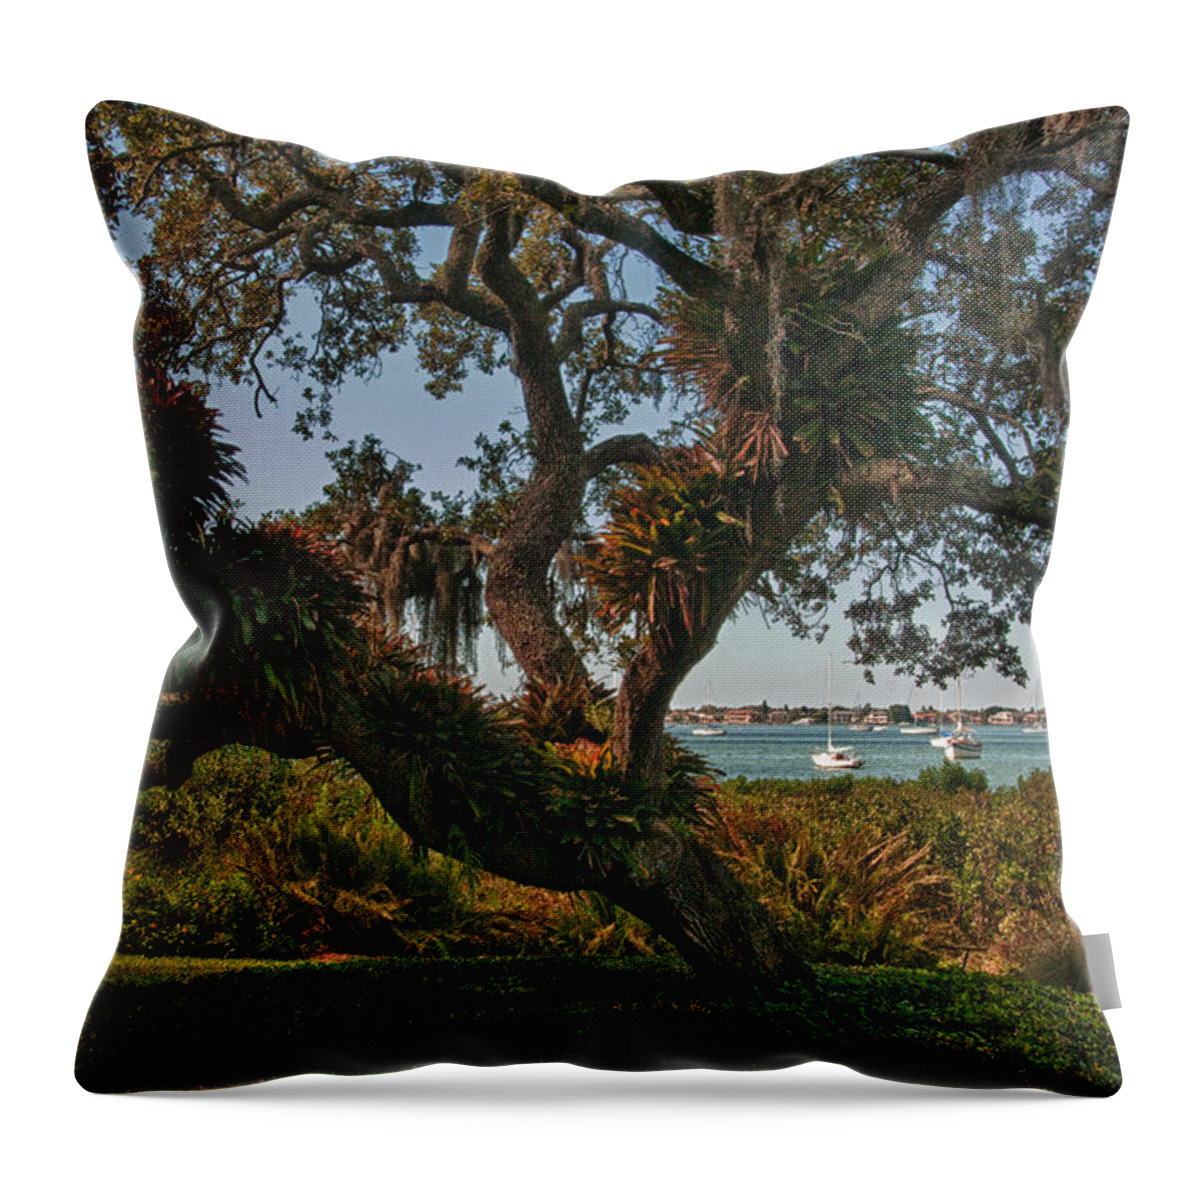 Garden Throw Pillow featuring the photograph Sarasota Bay View by Mitch Spence